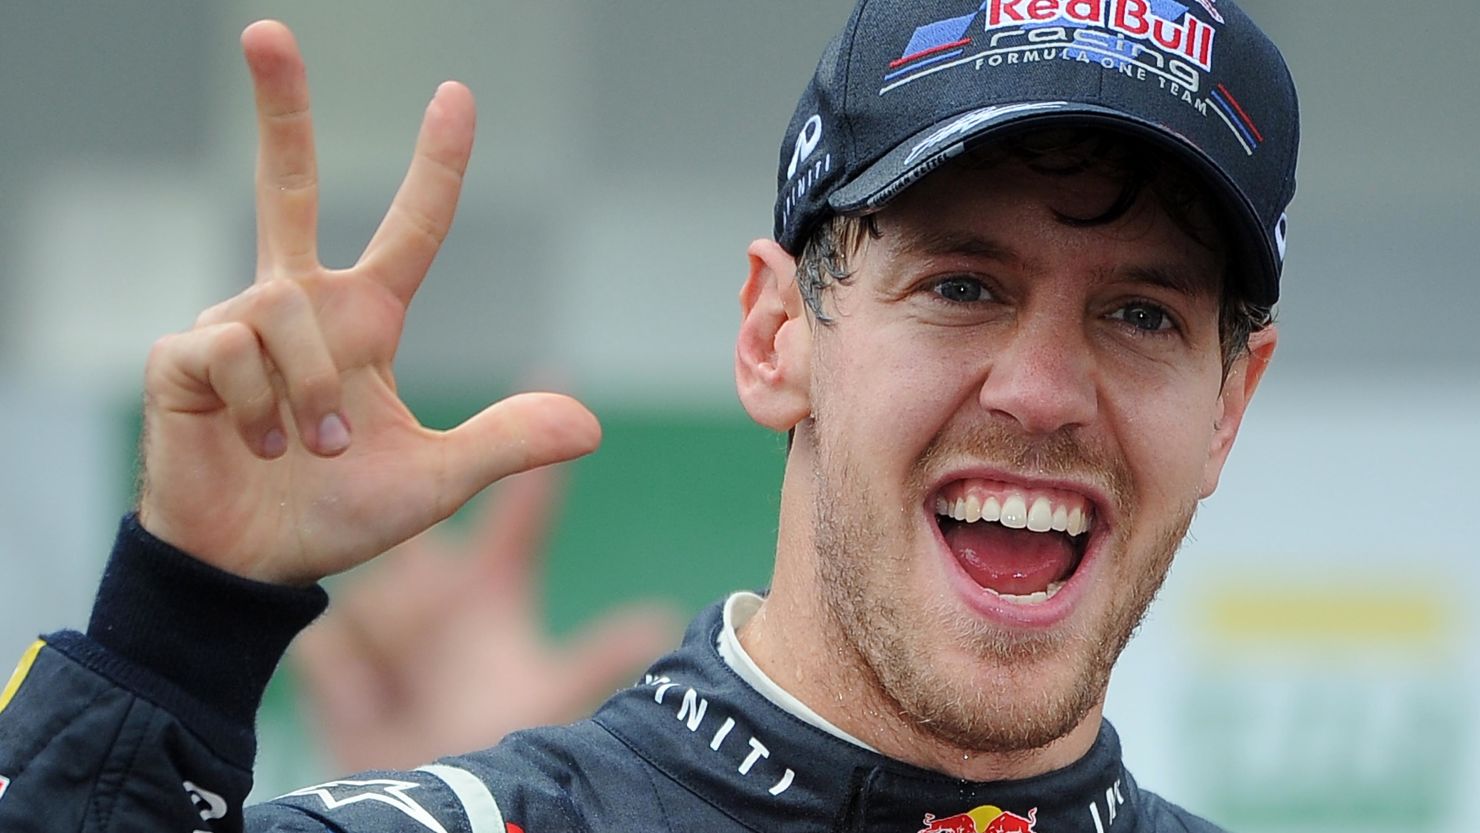 Red Bull's Sebastian Vettel has become the youngest triple world champion in Formula One history.